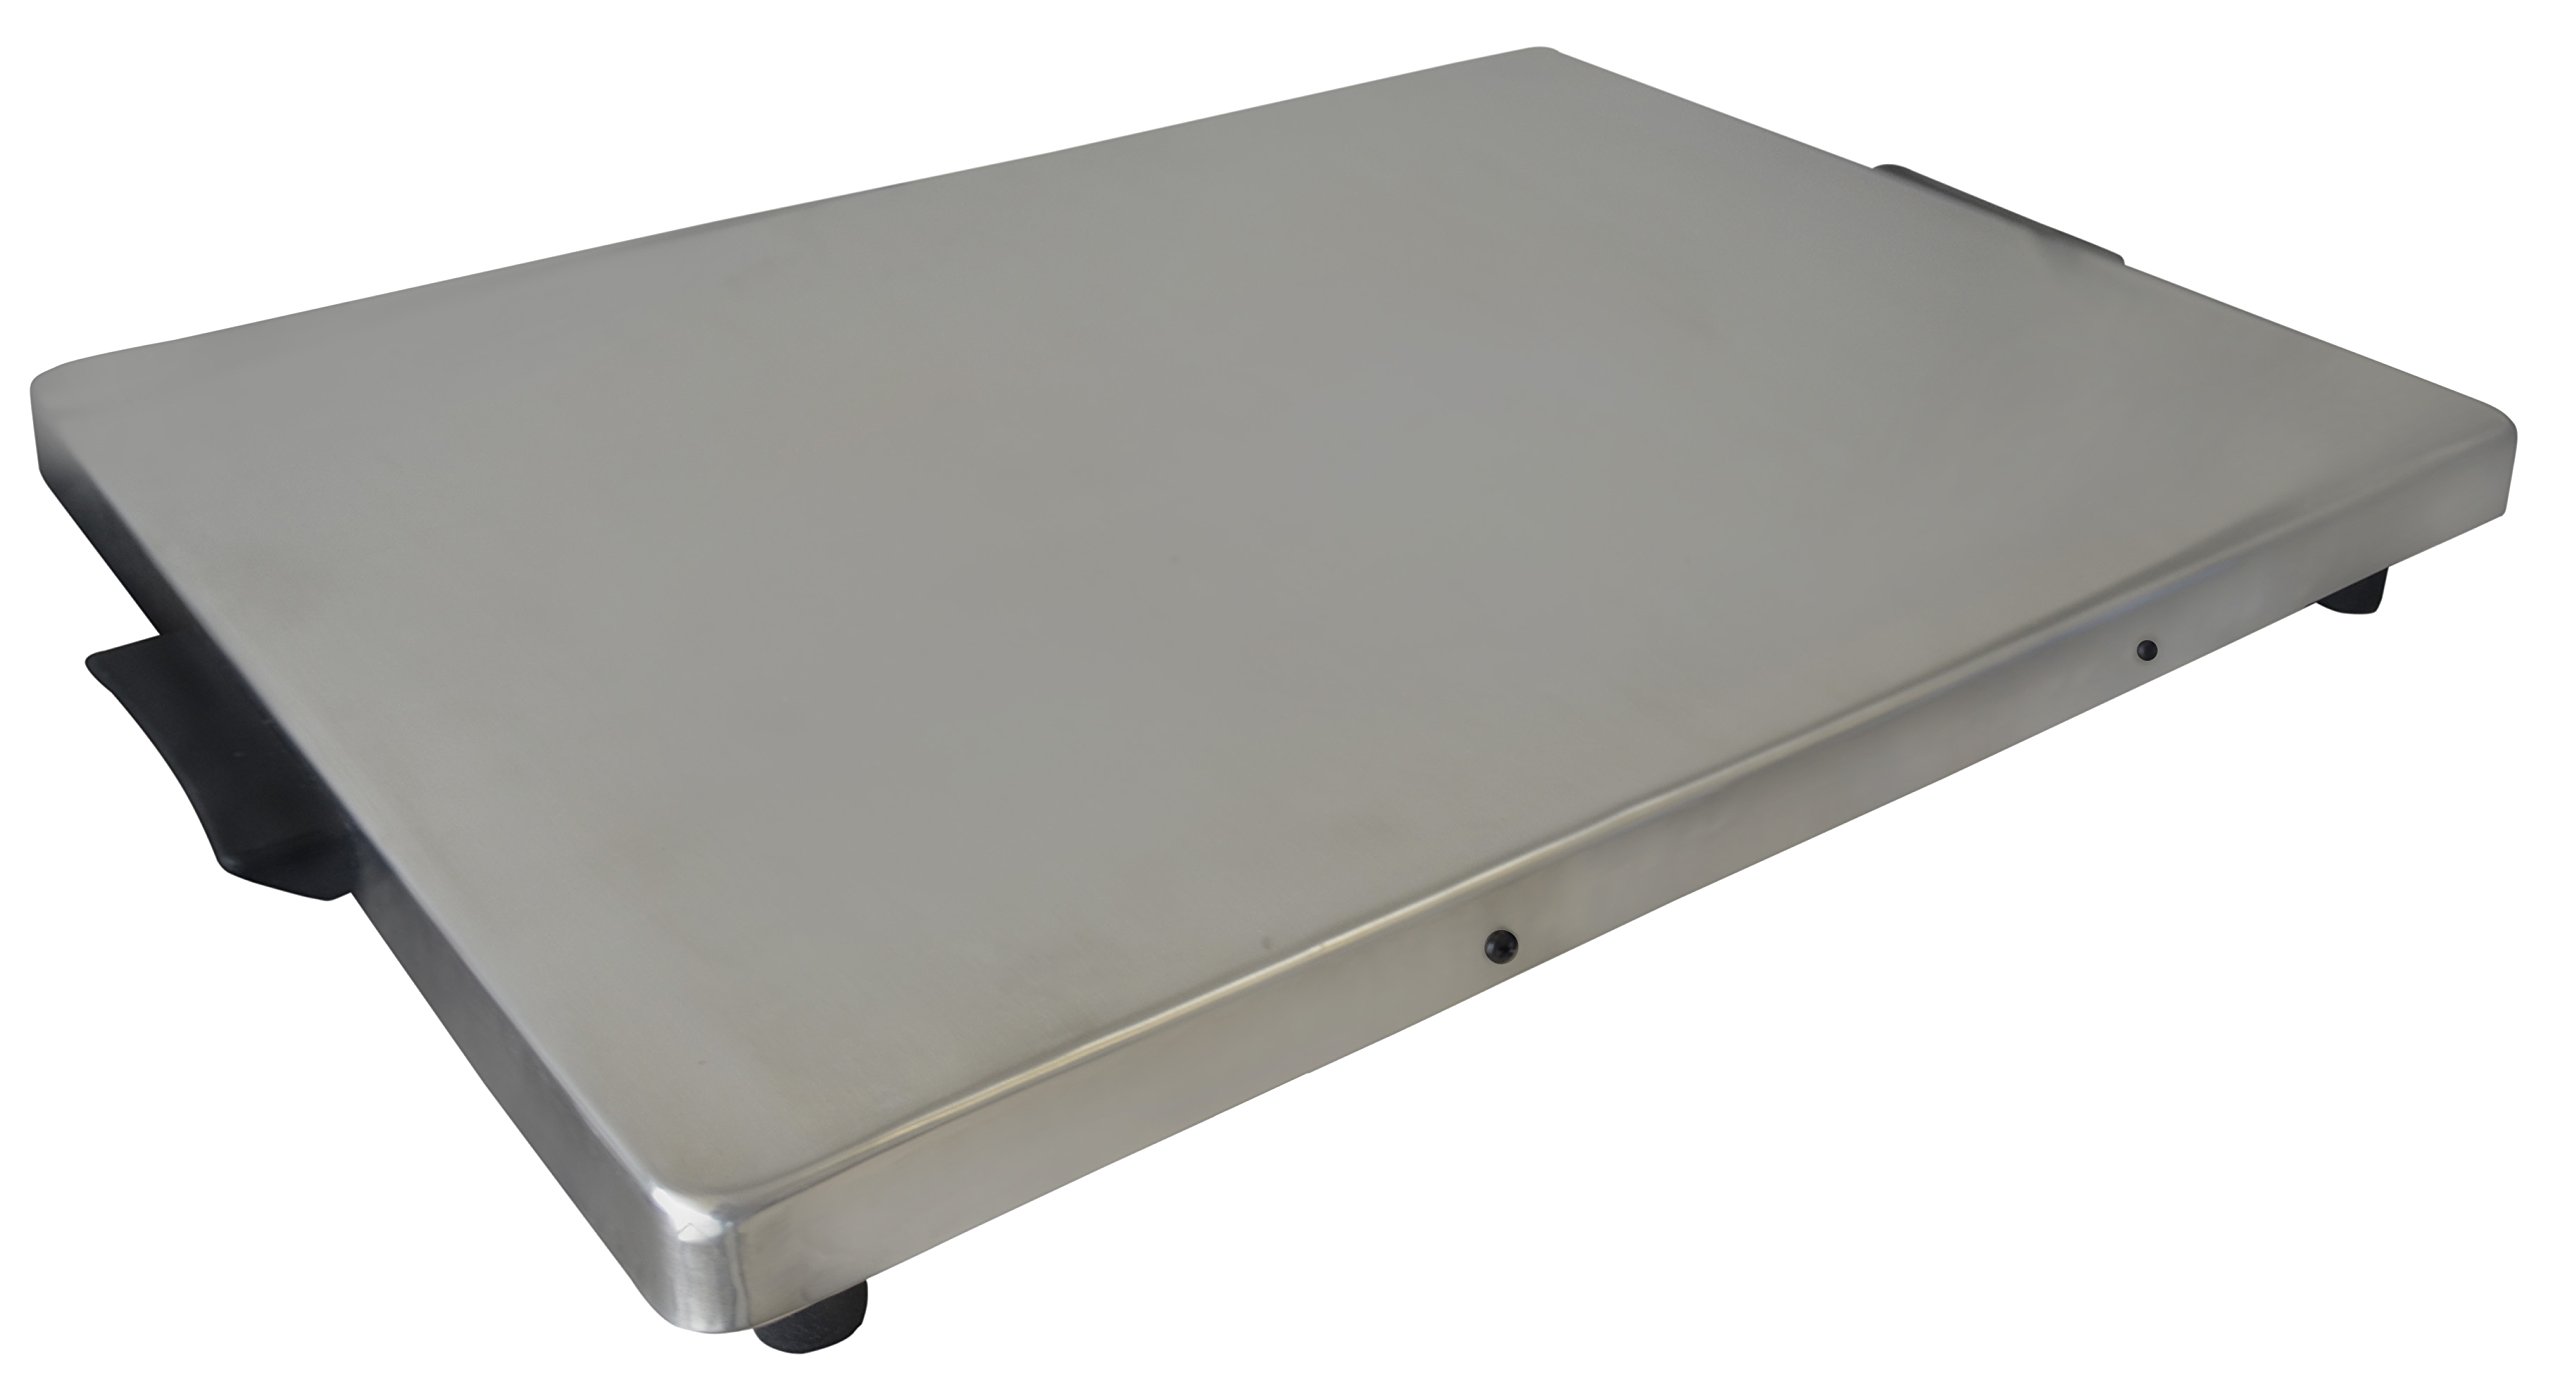 Shabbat Hot Plate - The Best Warming Trays for Shabbos